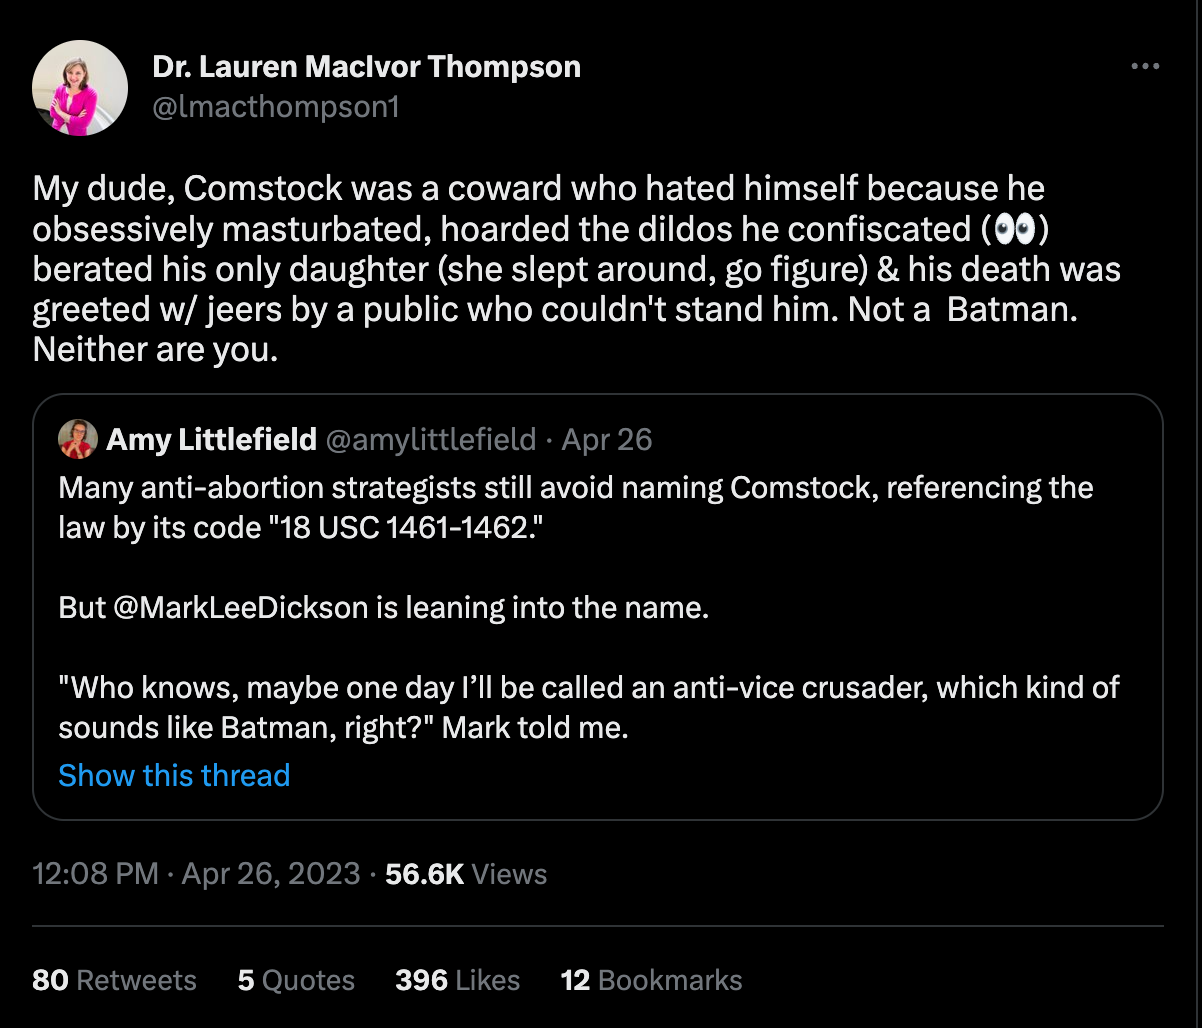 A tweet from Dr. Lauren MacIvor Thompson that says, "My dude, Comstock was a coward who hated himself because he obsessively masturbated, hoarded the dildos he confiscated (👀) berated his only daughter (she slept around, go figure) & his death was greeted w/ jeers by a public who couldn't stand him. Not a  Batman. Neither are you."